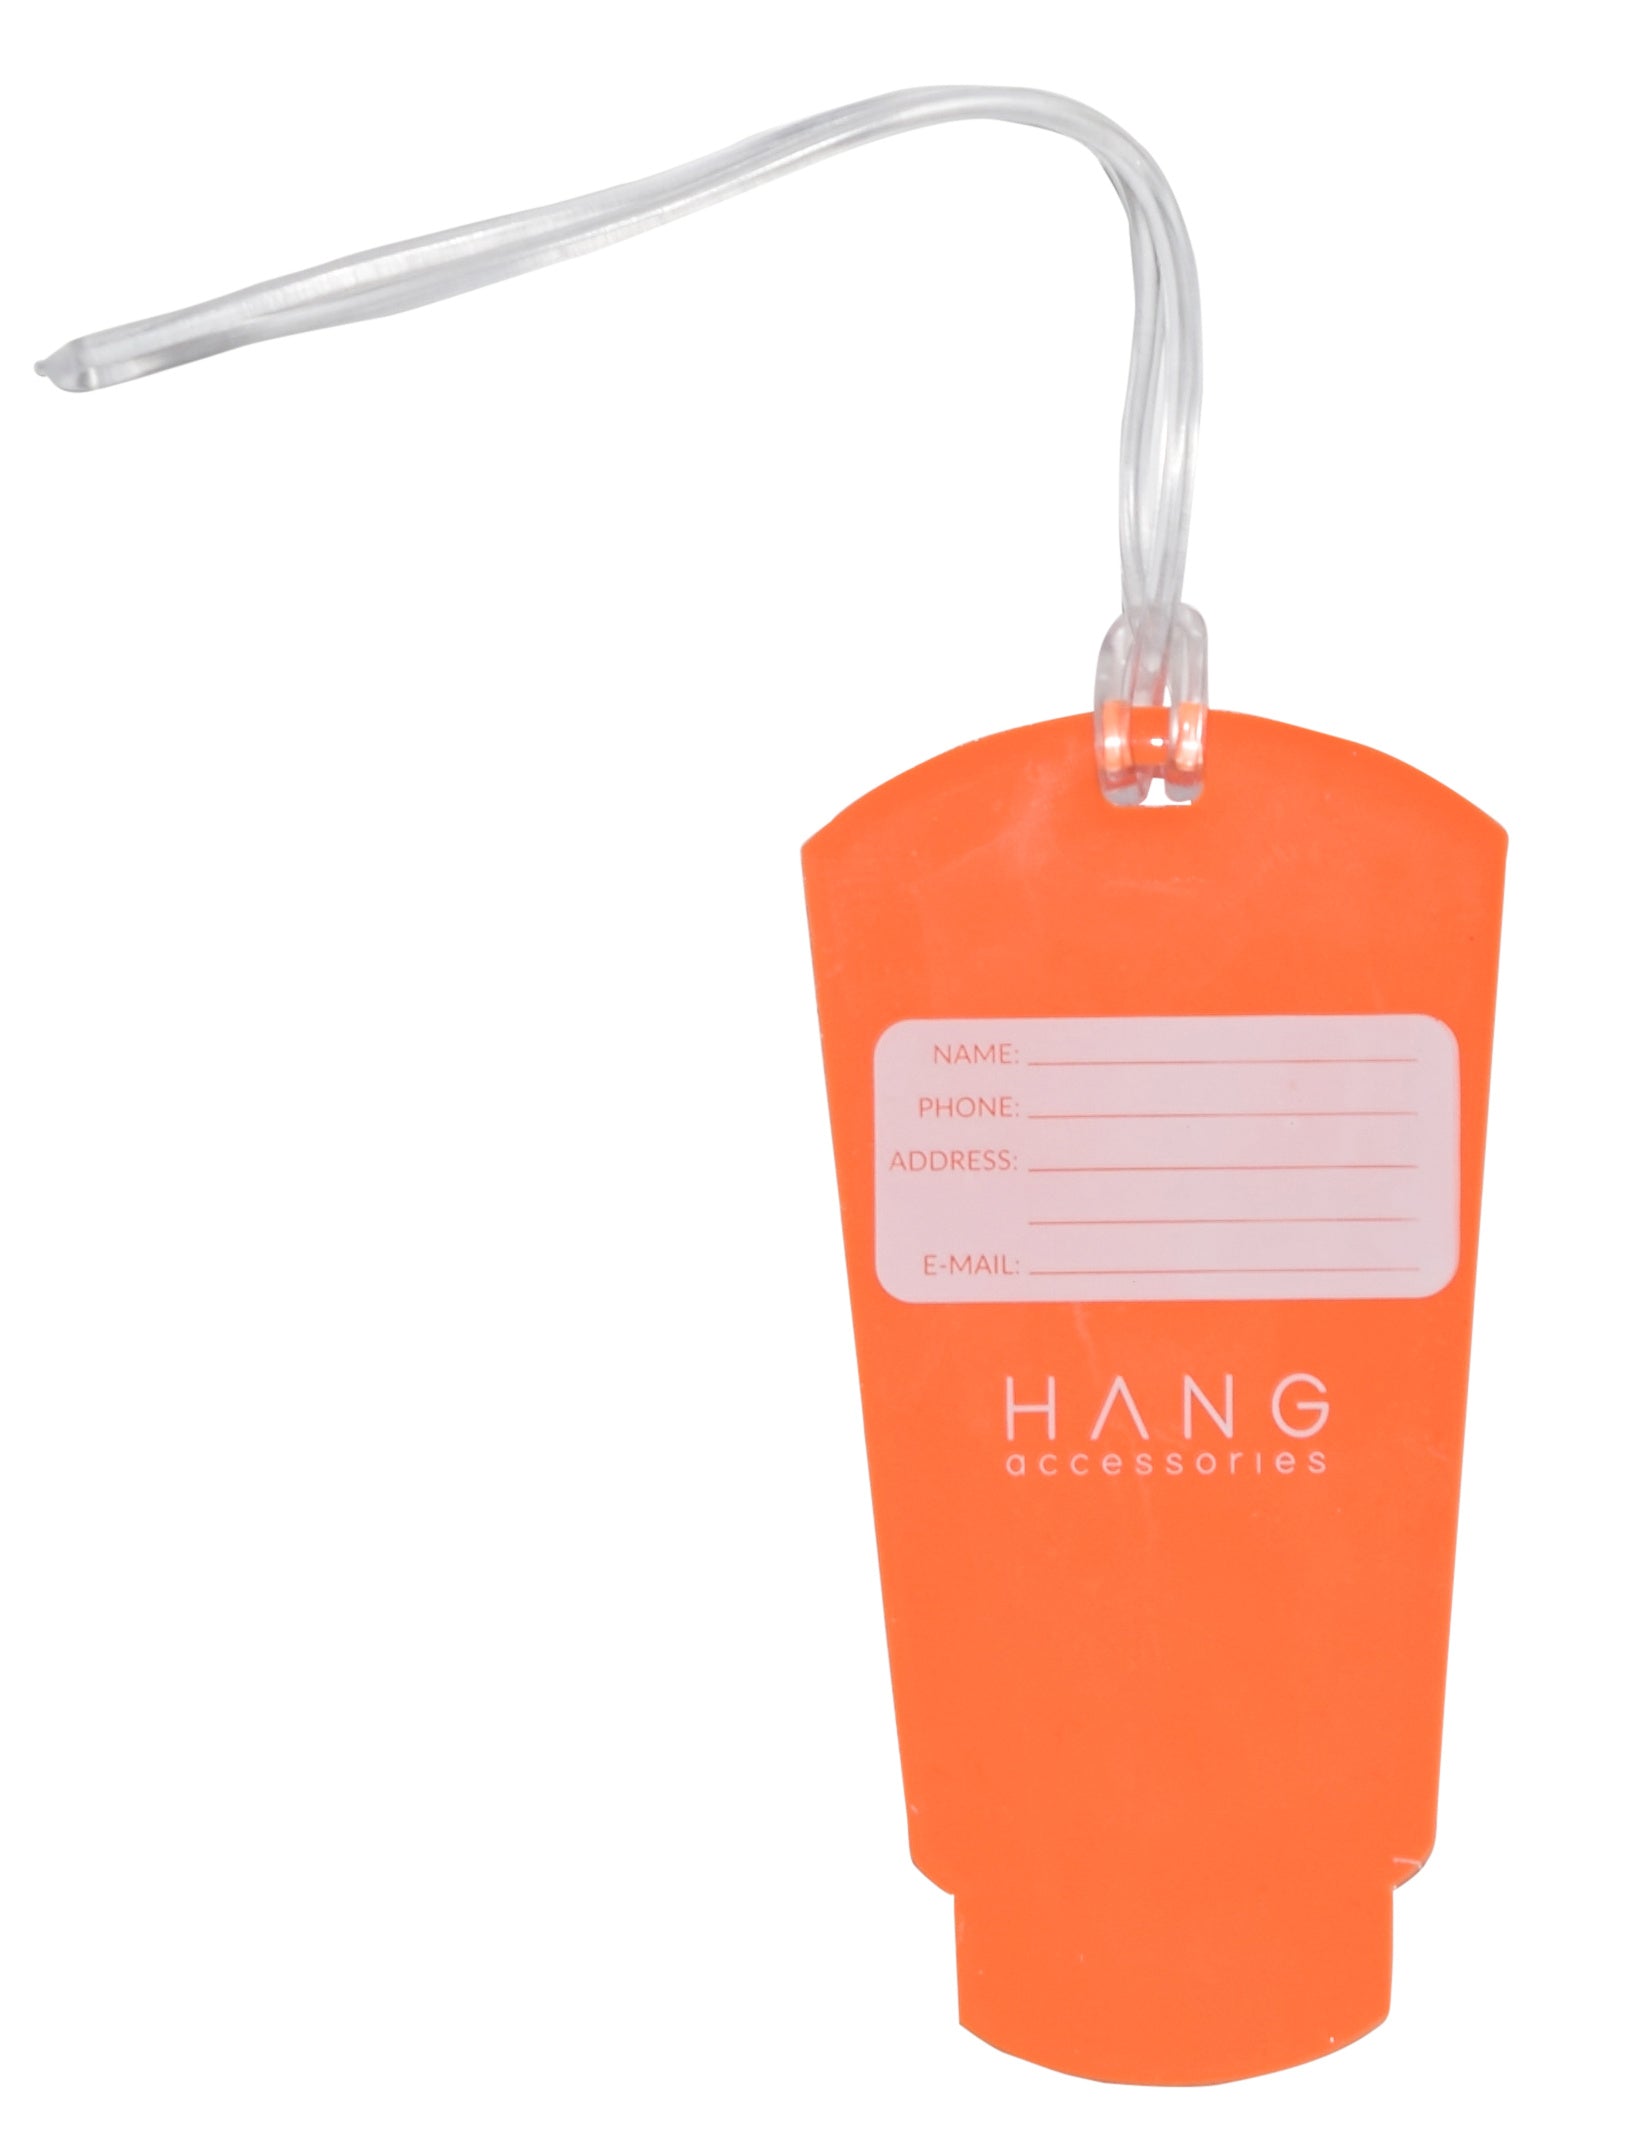 Vacay Ready Travel Journal & Silicone Luggage Tag Set